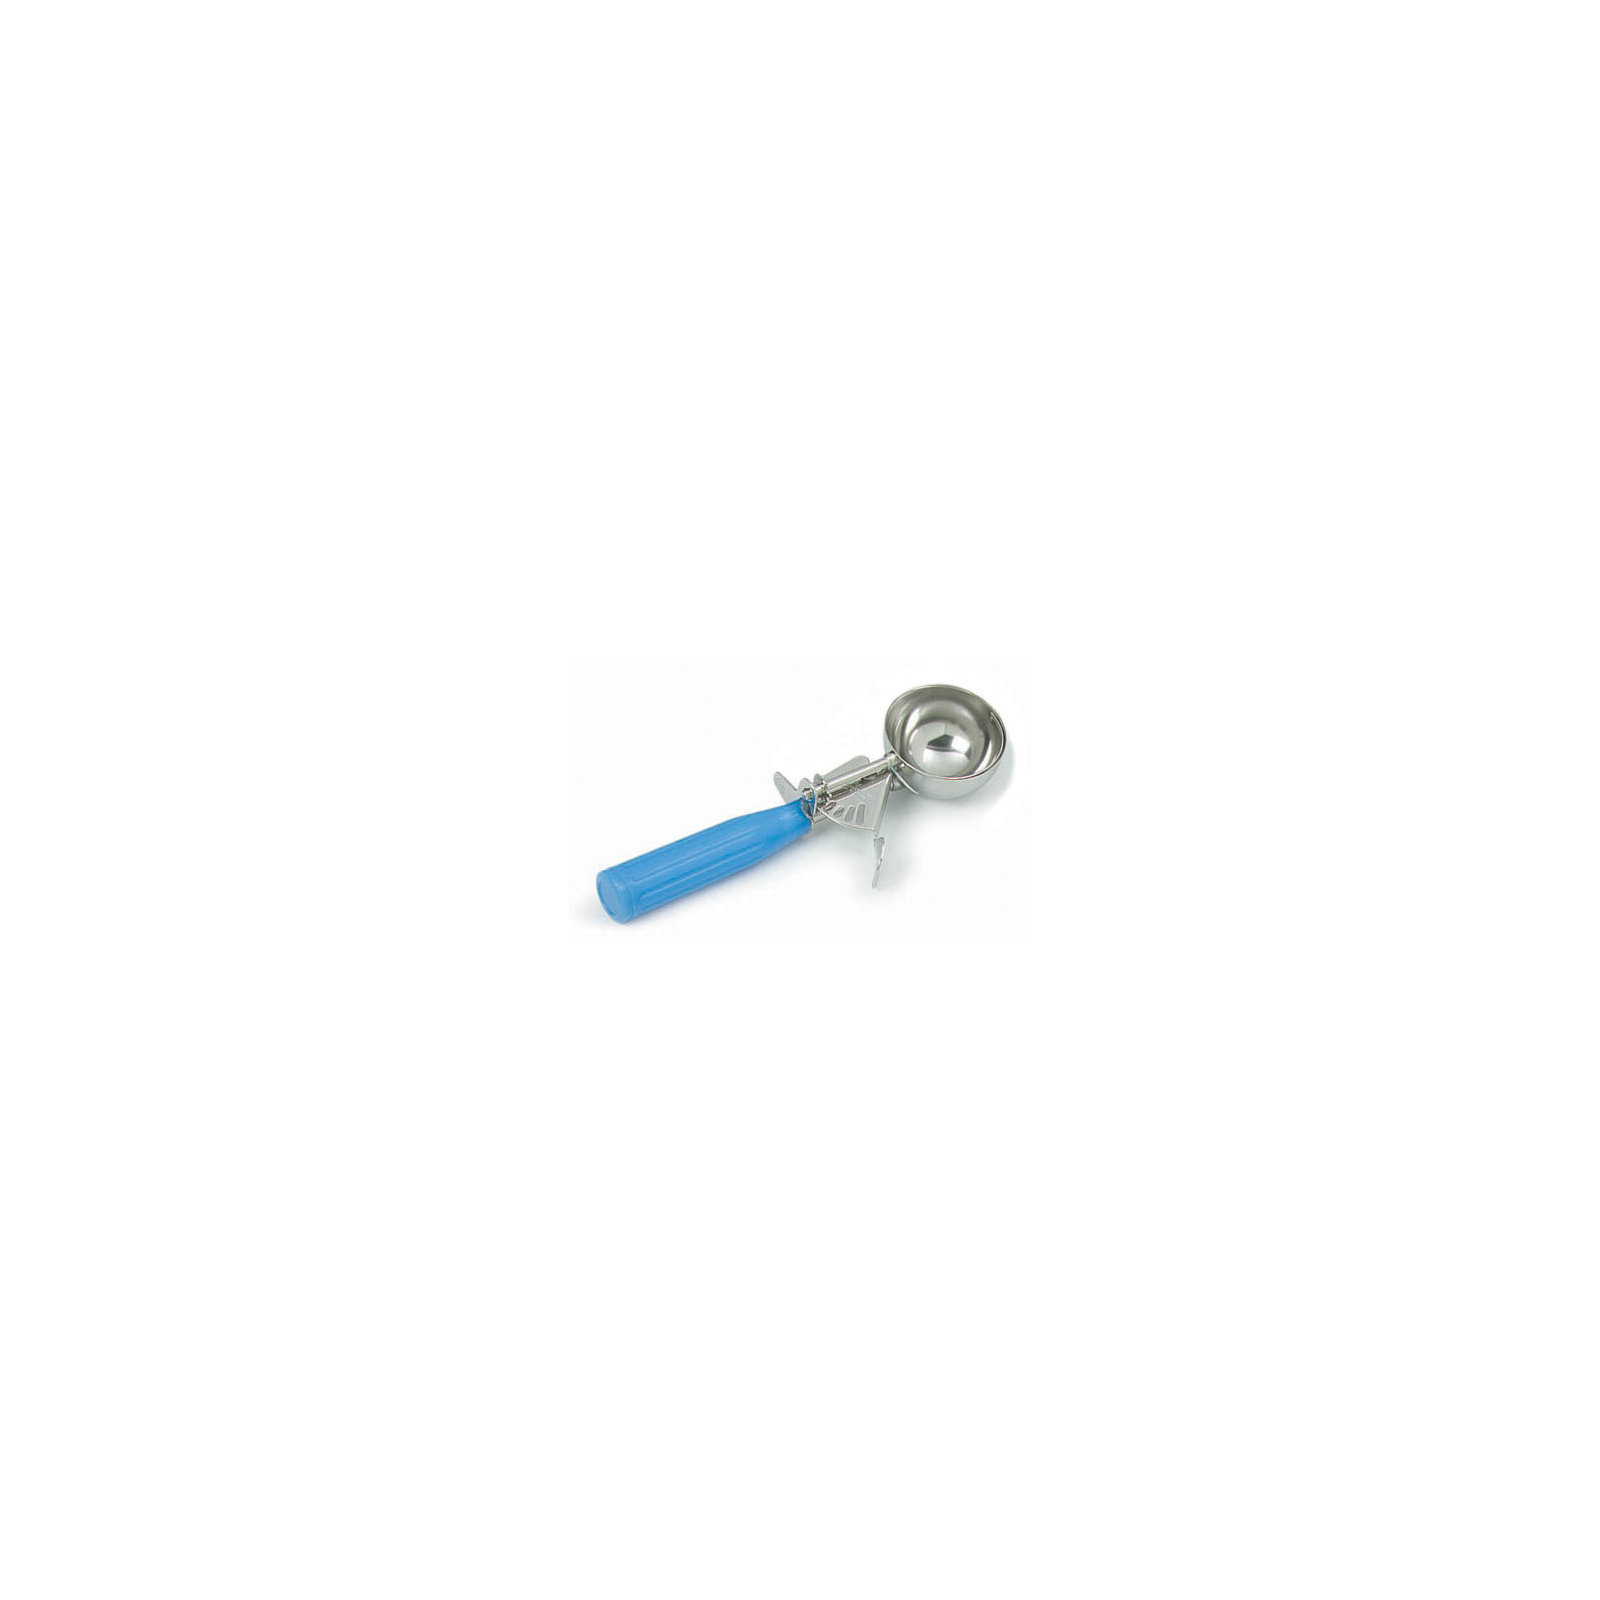 60300-16 - Stainless Steel Disher Scoop #16 Size 2.75 oz - Blue